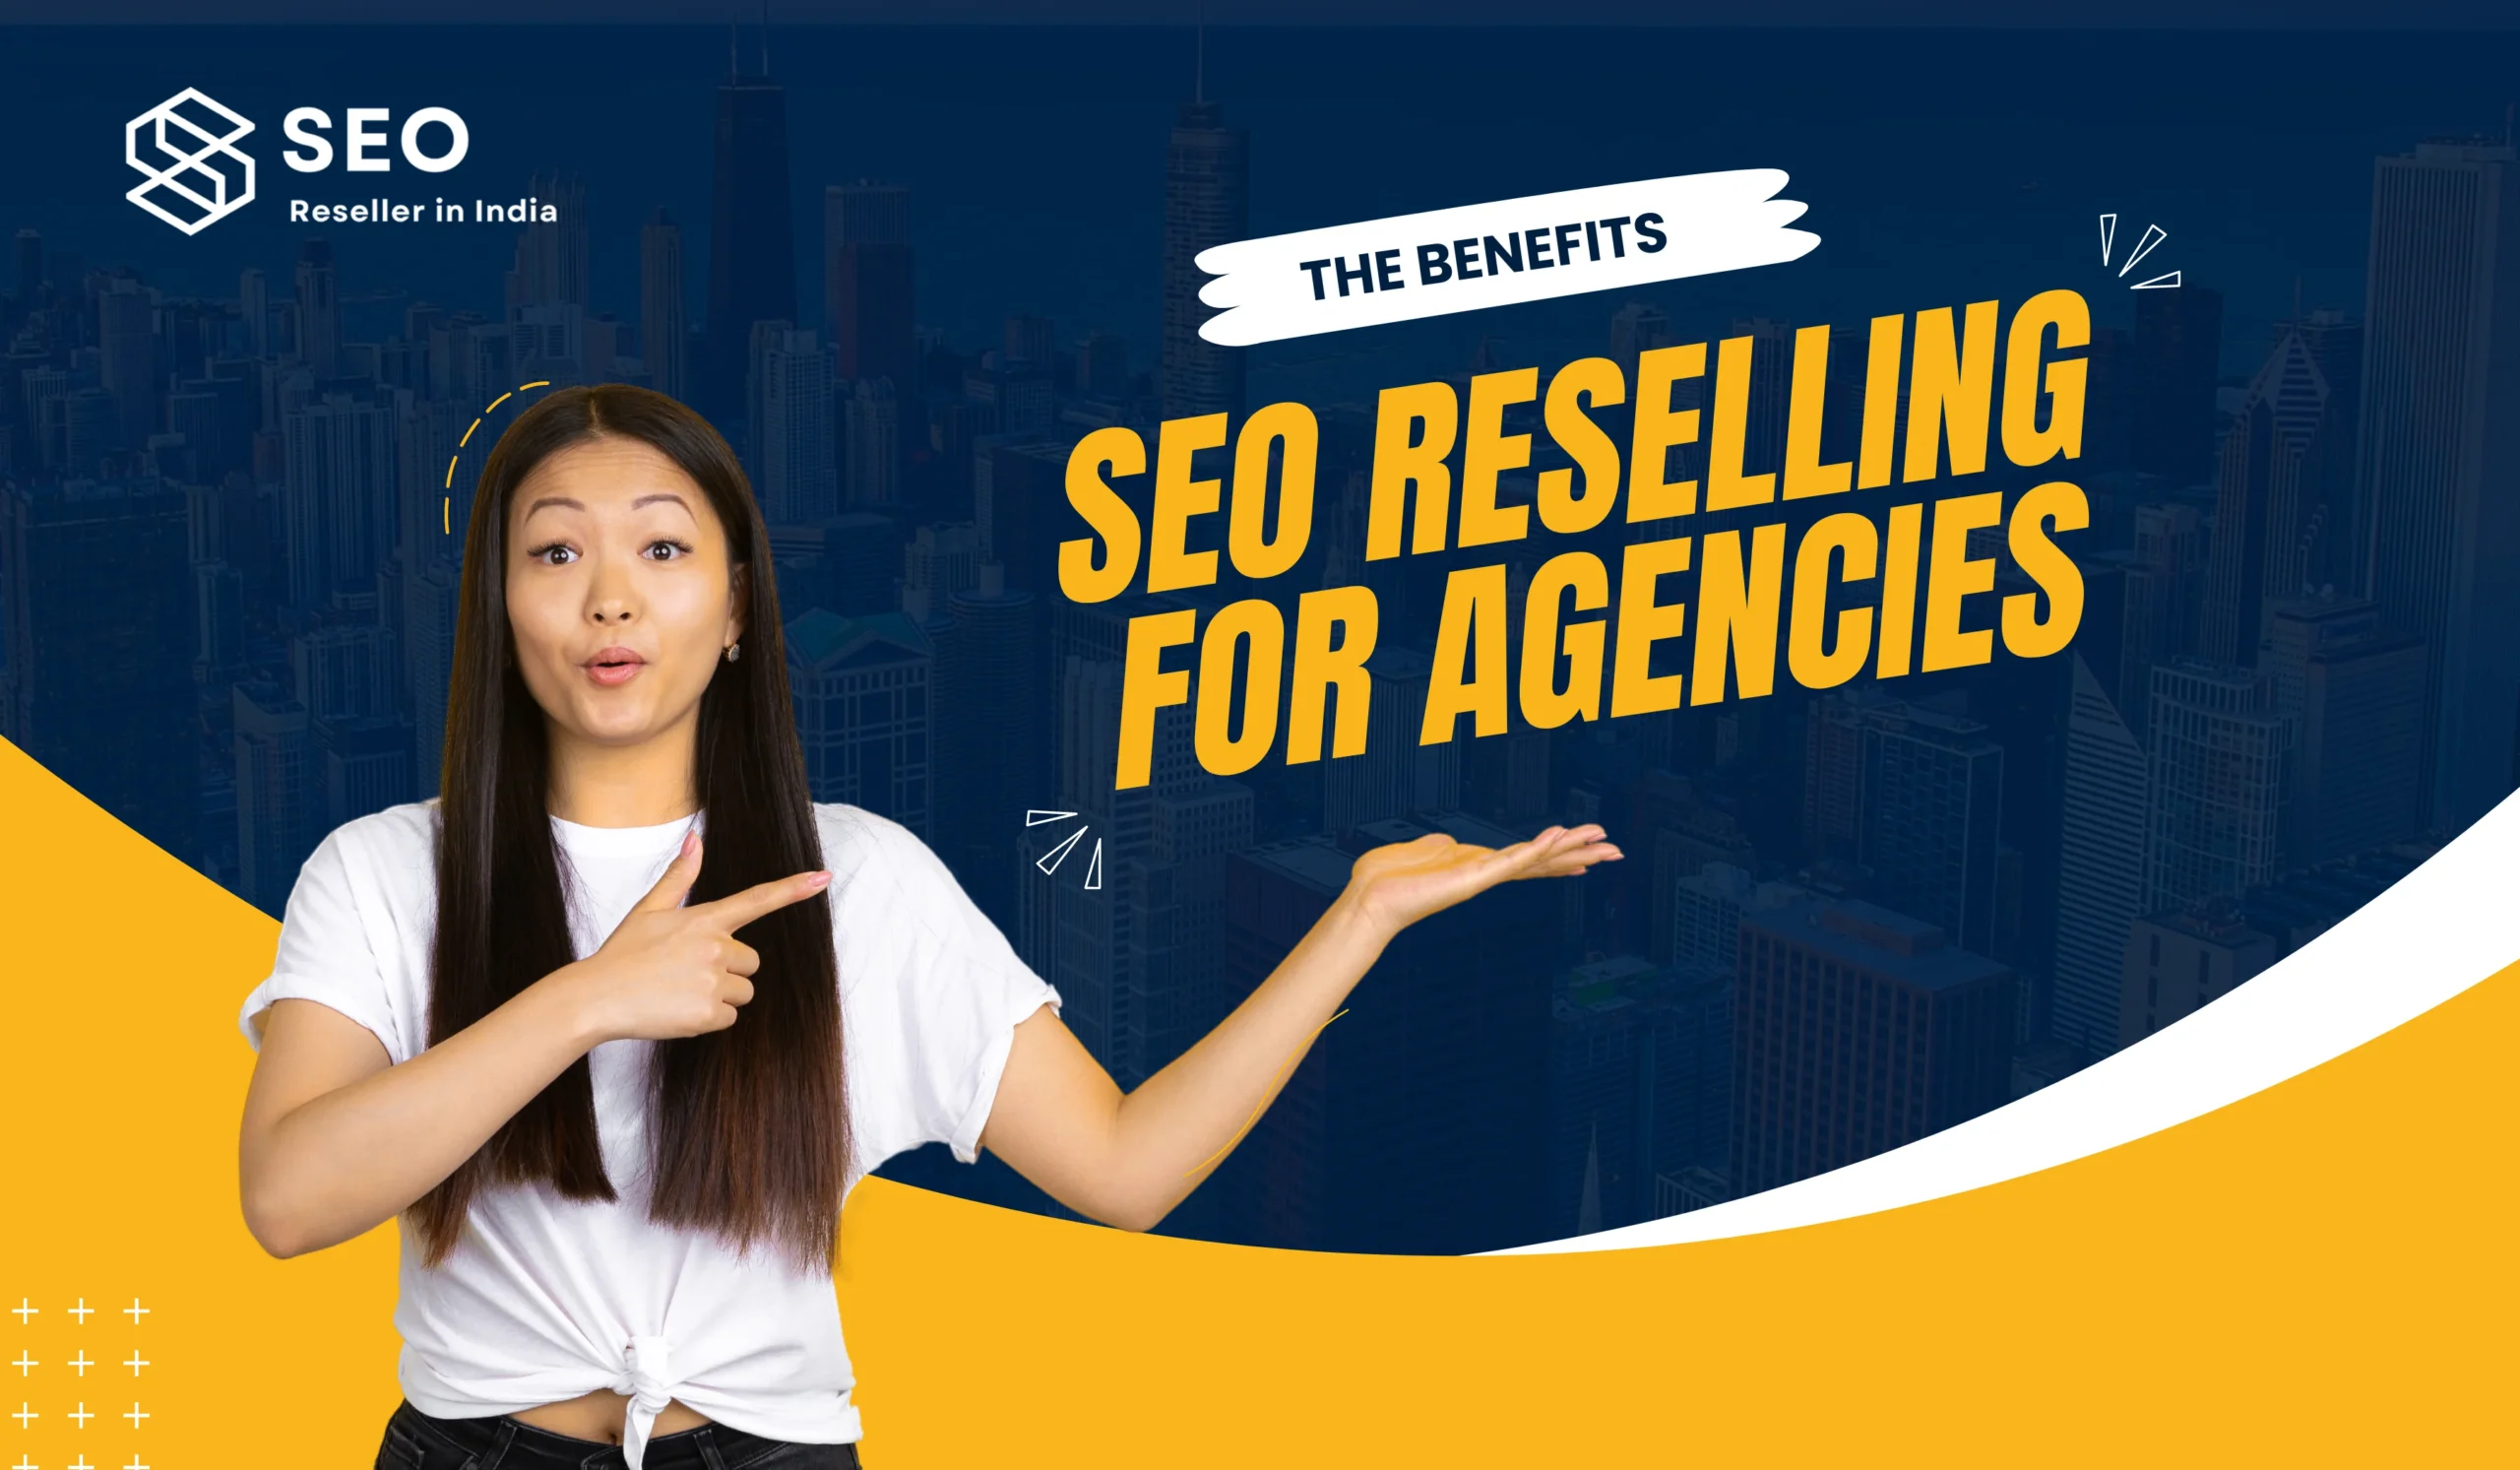 The Benefits of SEO Reselling for Agencies